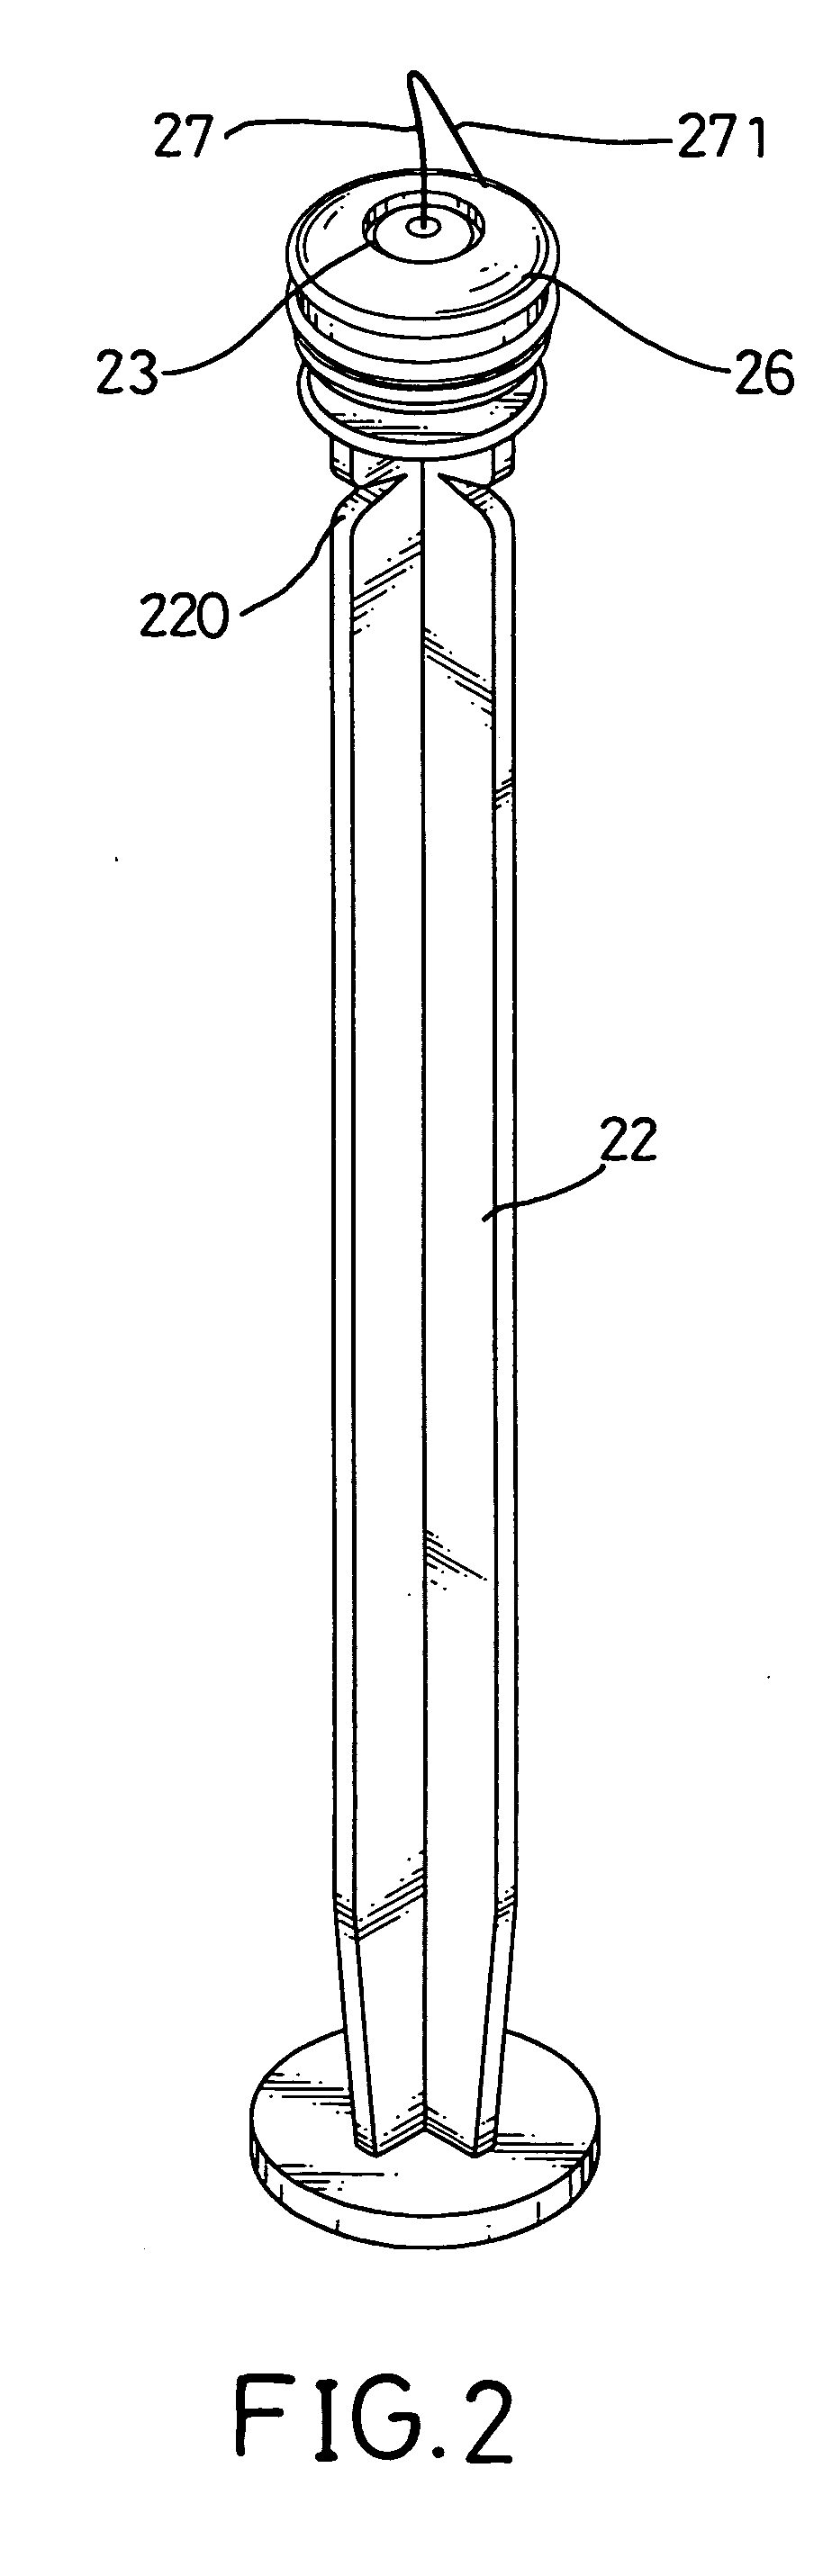 Retracting device for a safety syringe